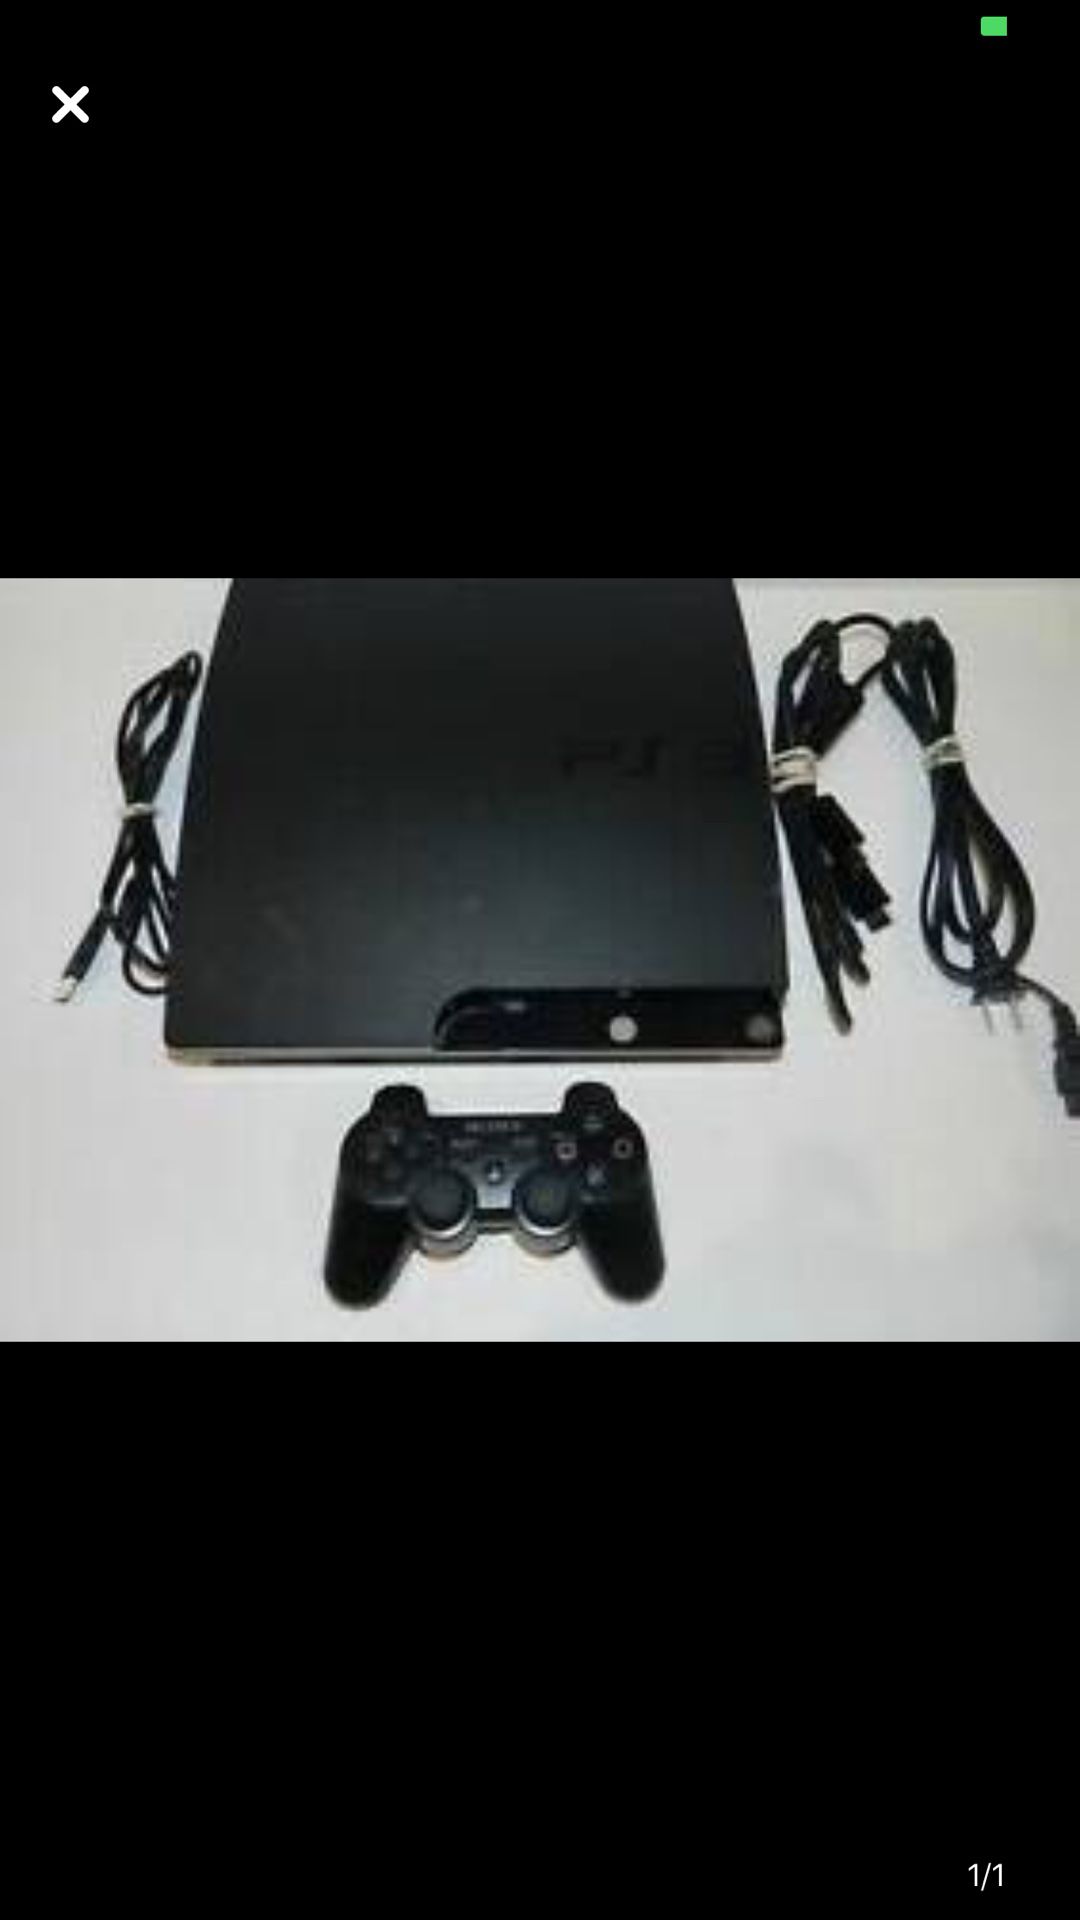 PS3 80 gb. Comes with wireless controller. Resident evil 5, Batman origins, mortal kombat x, and god of war 1-3